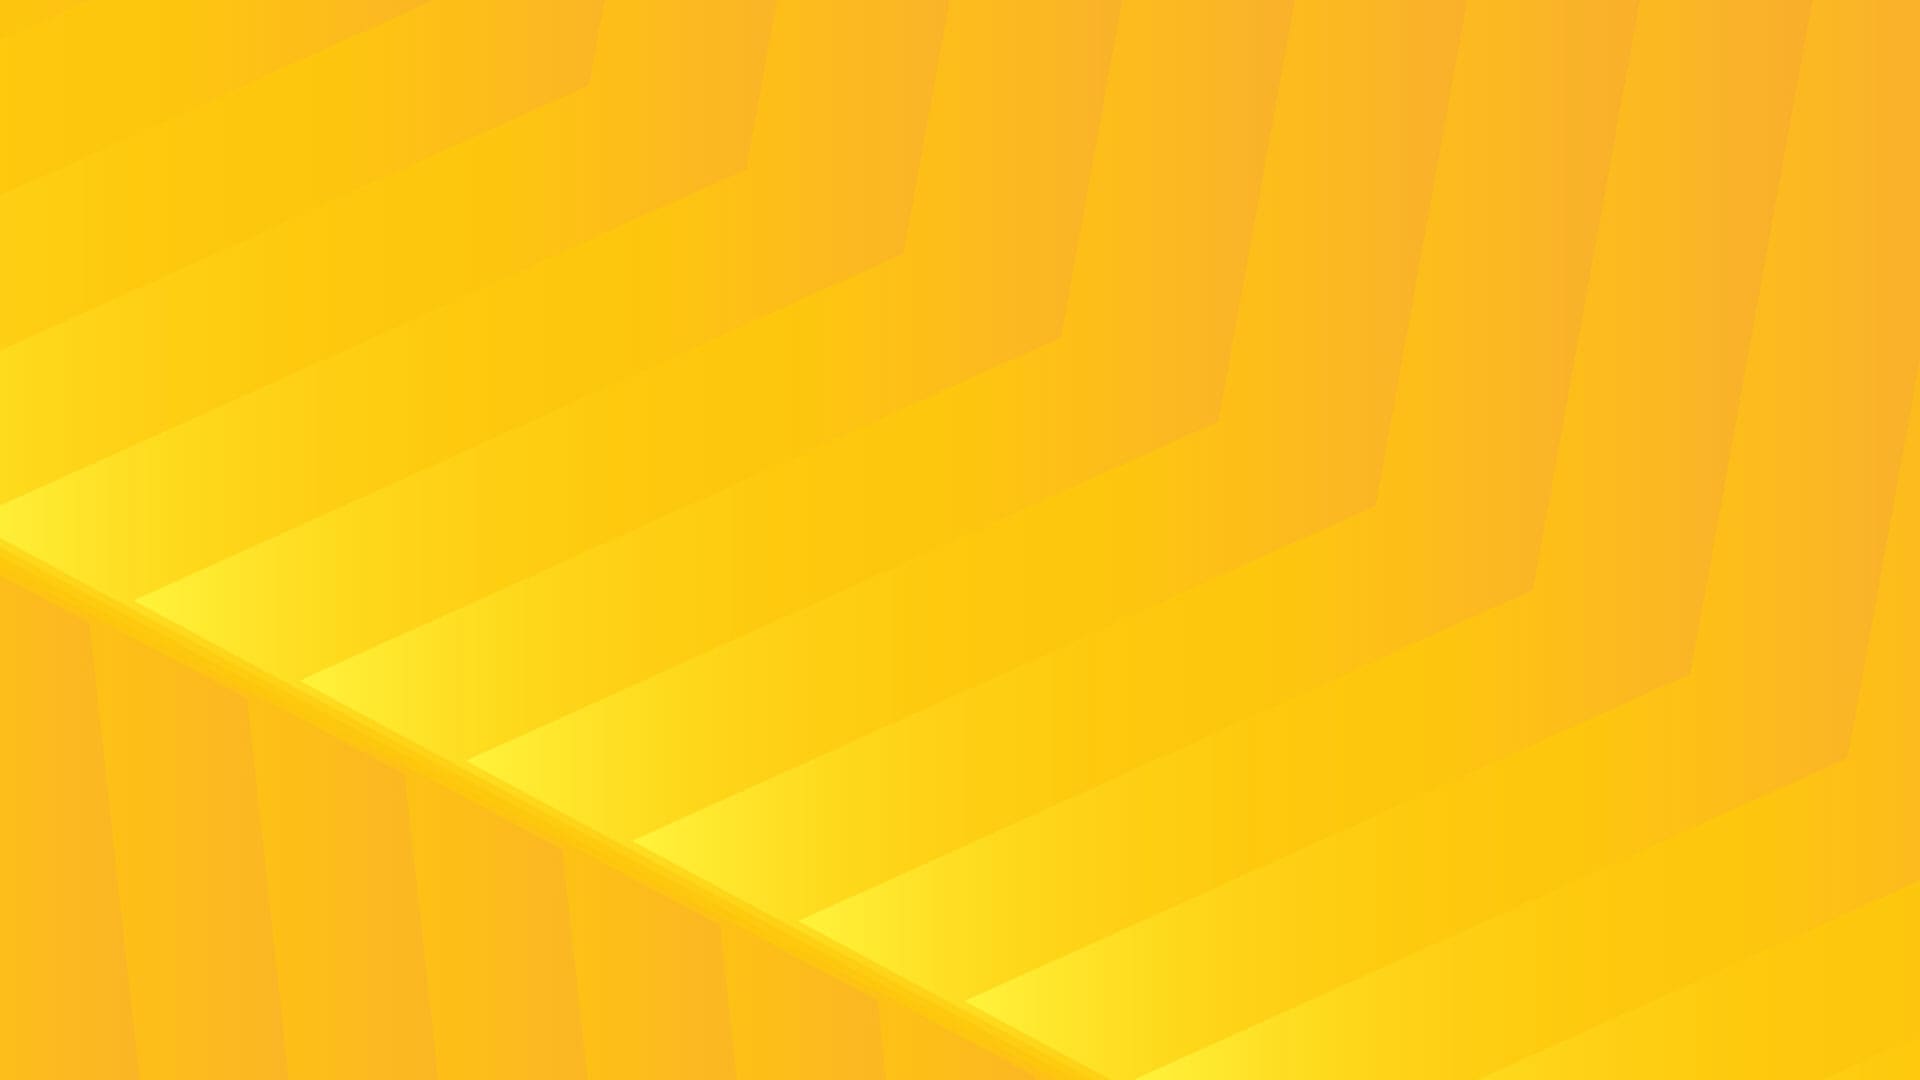 Yellow and Orange 3d Background